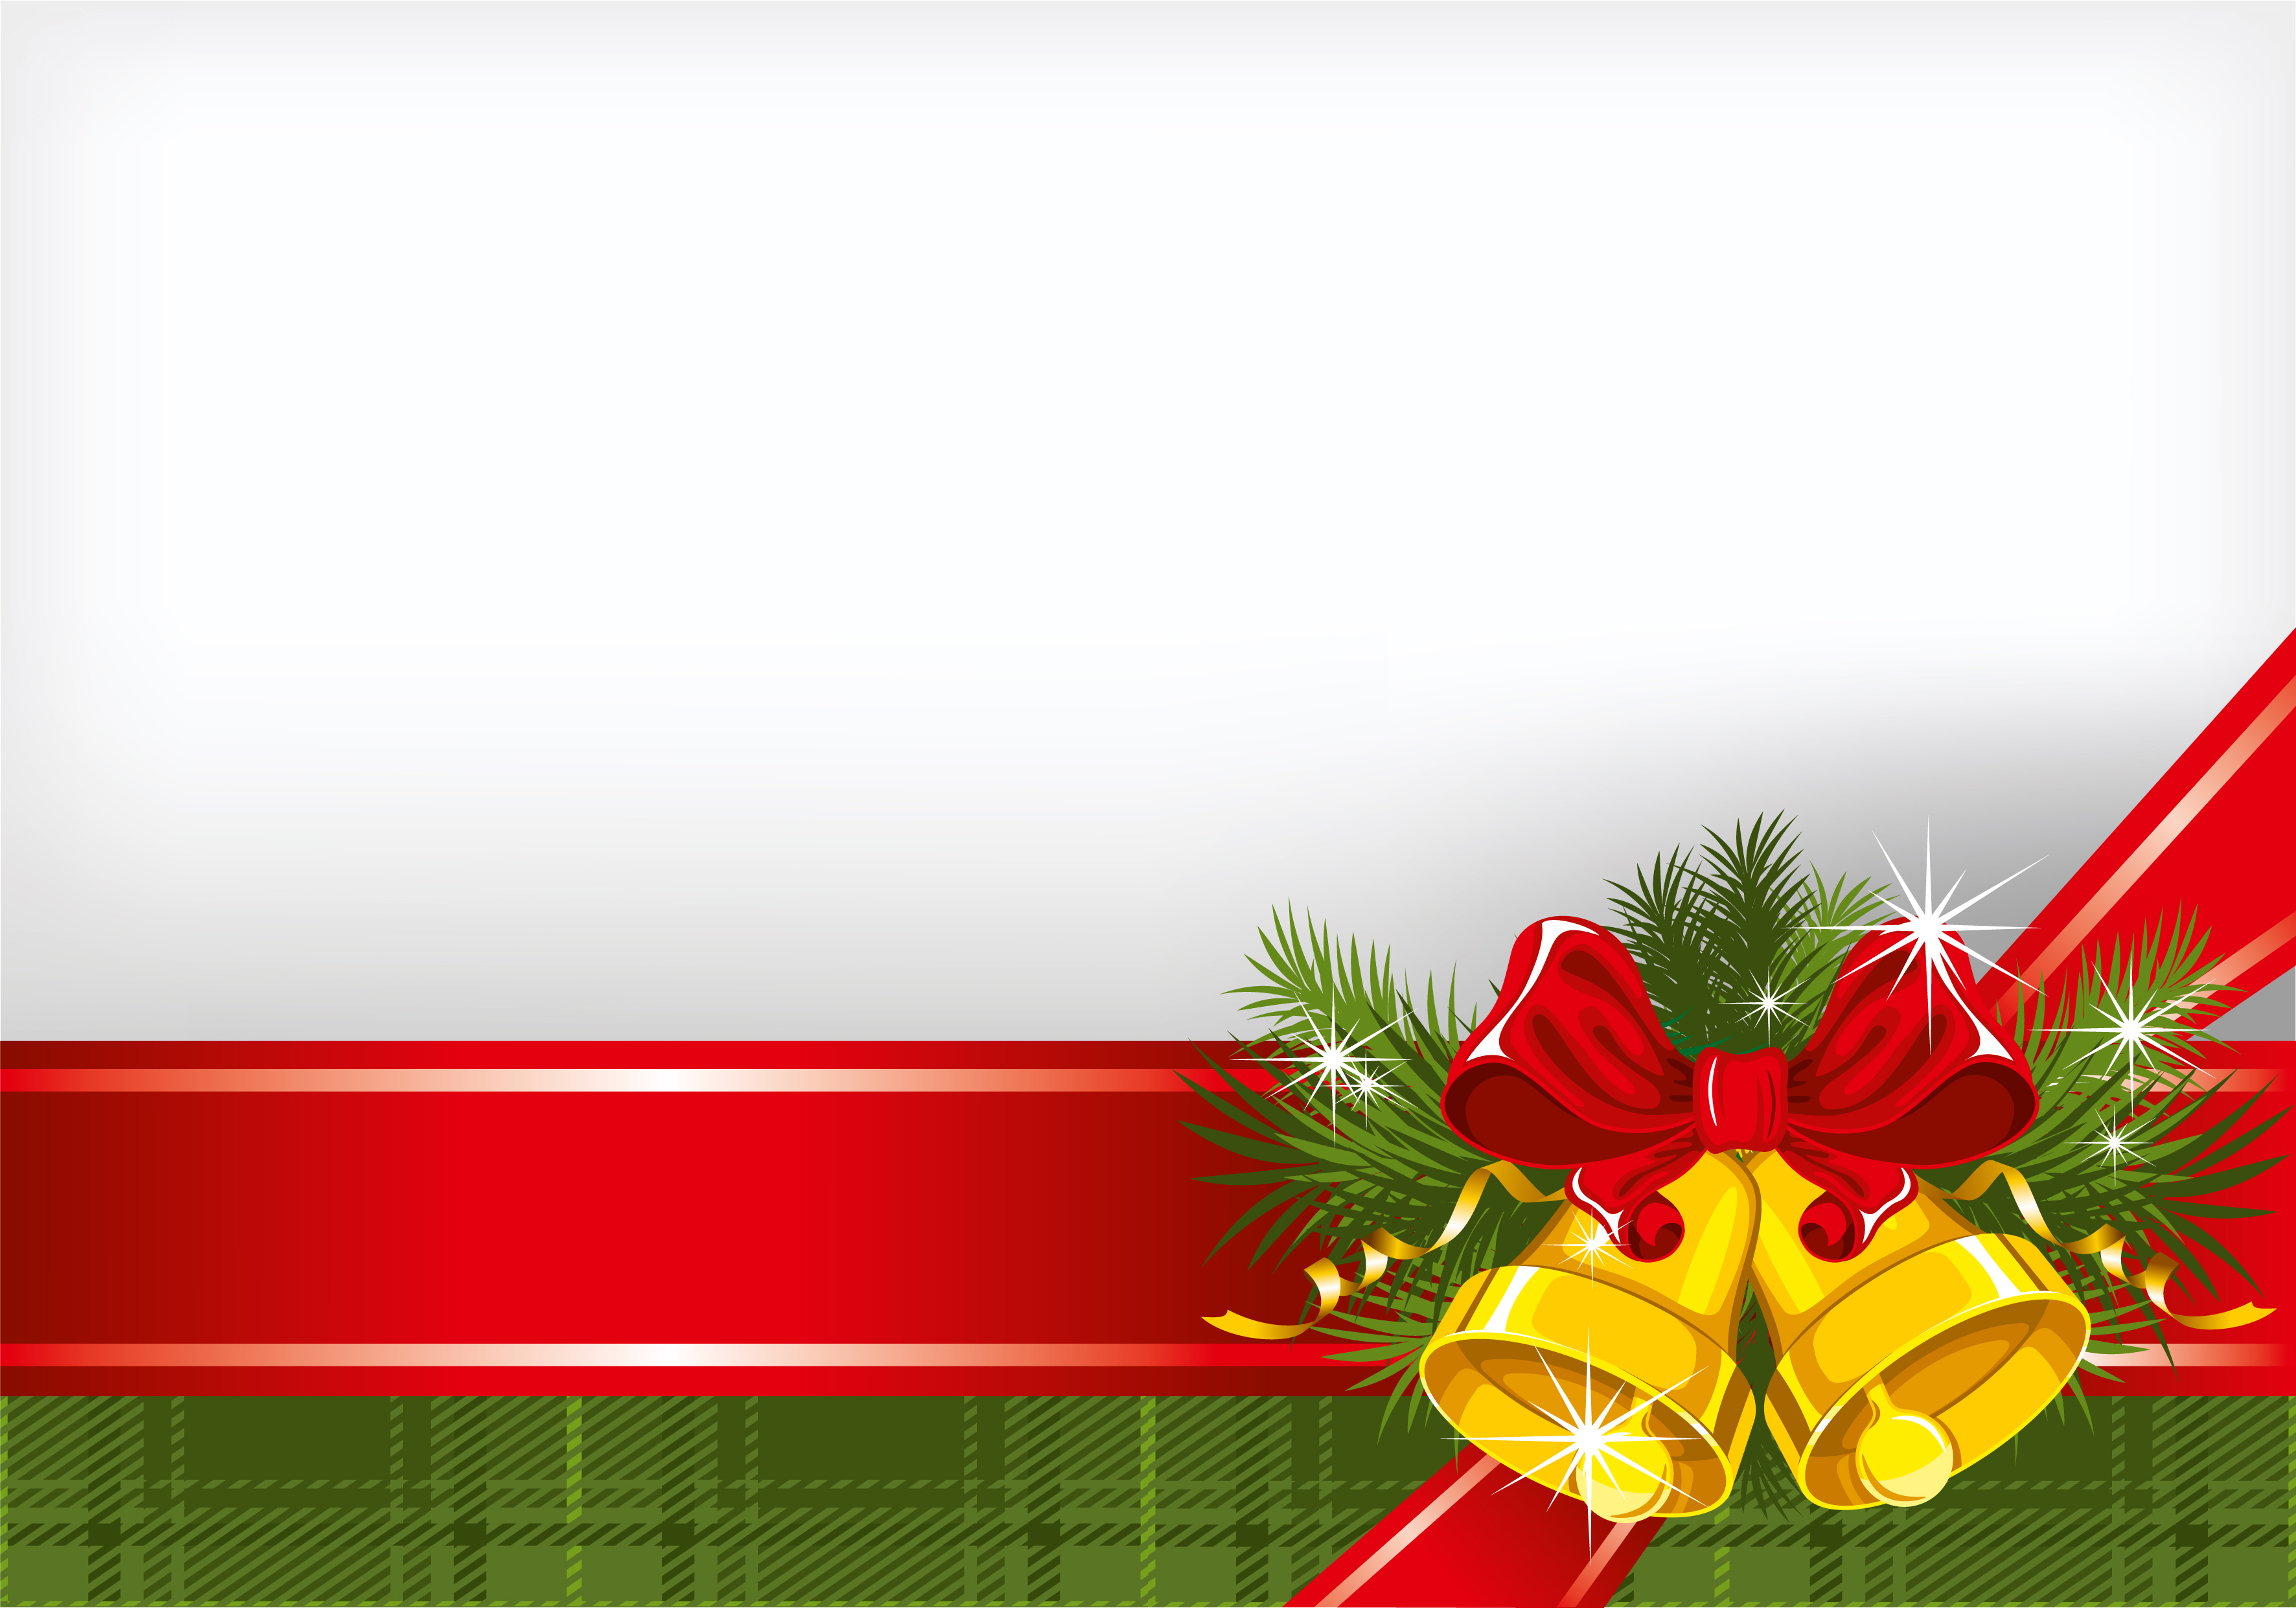 Christmas Vector Free Download